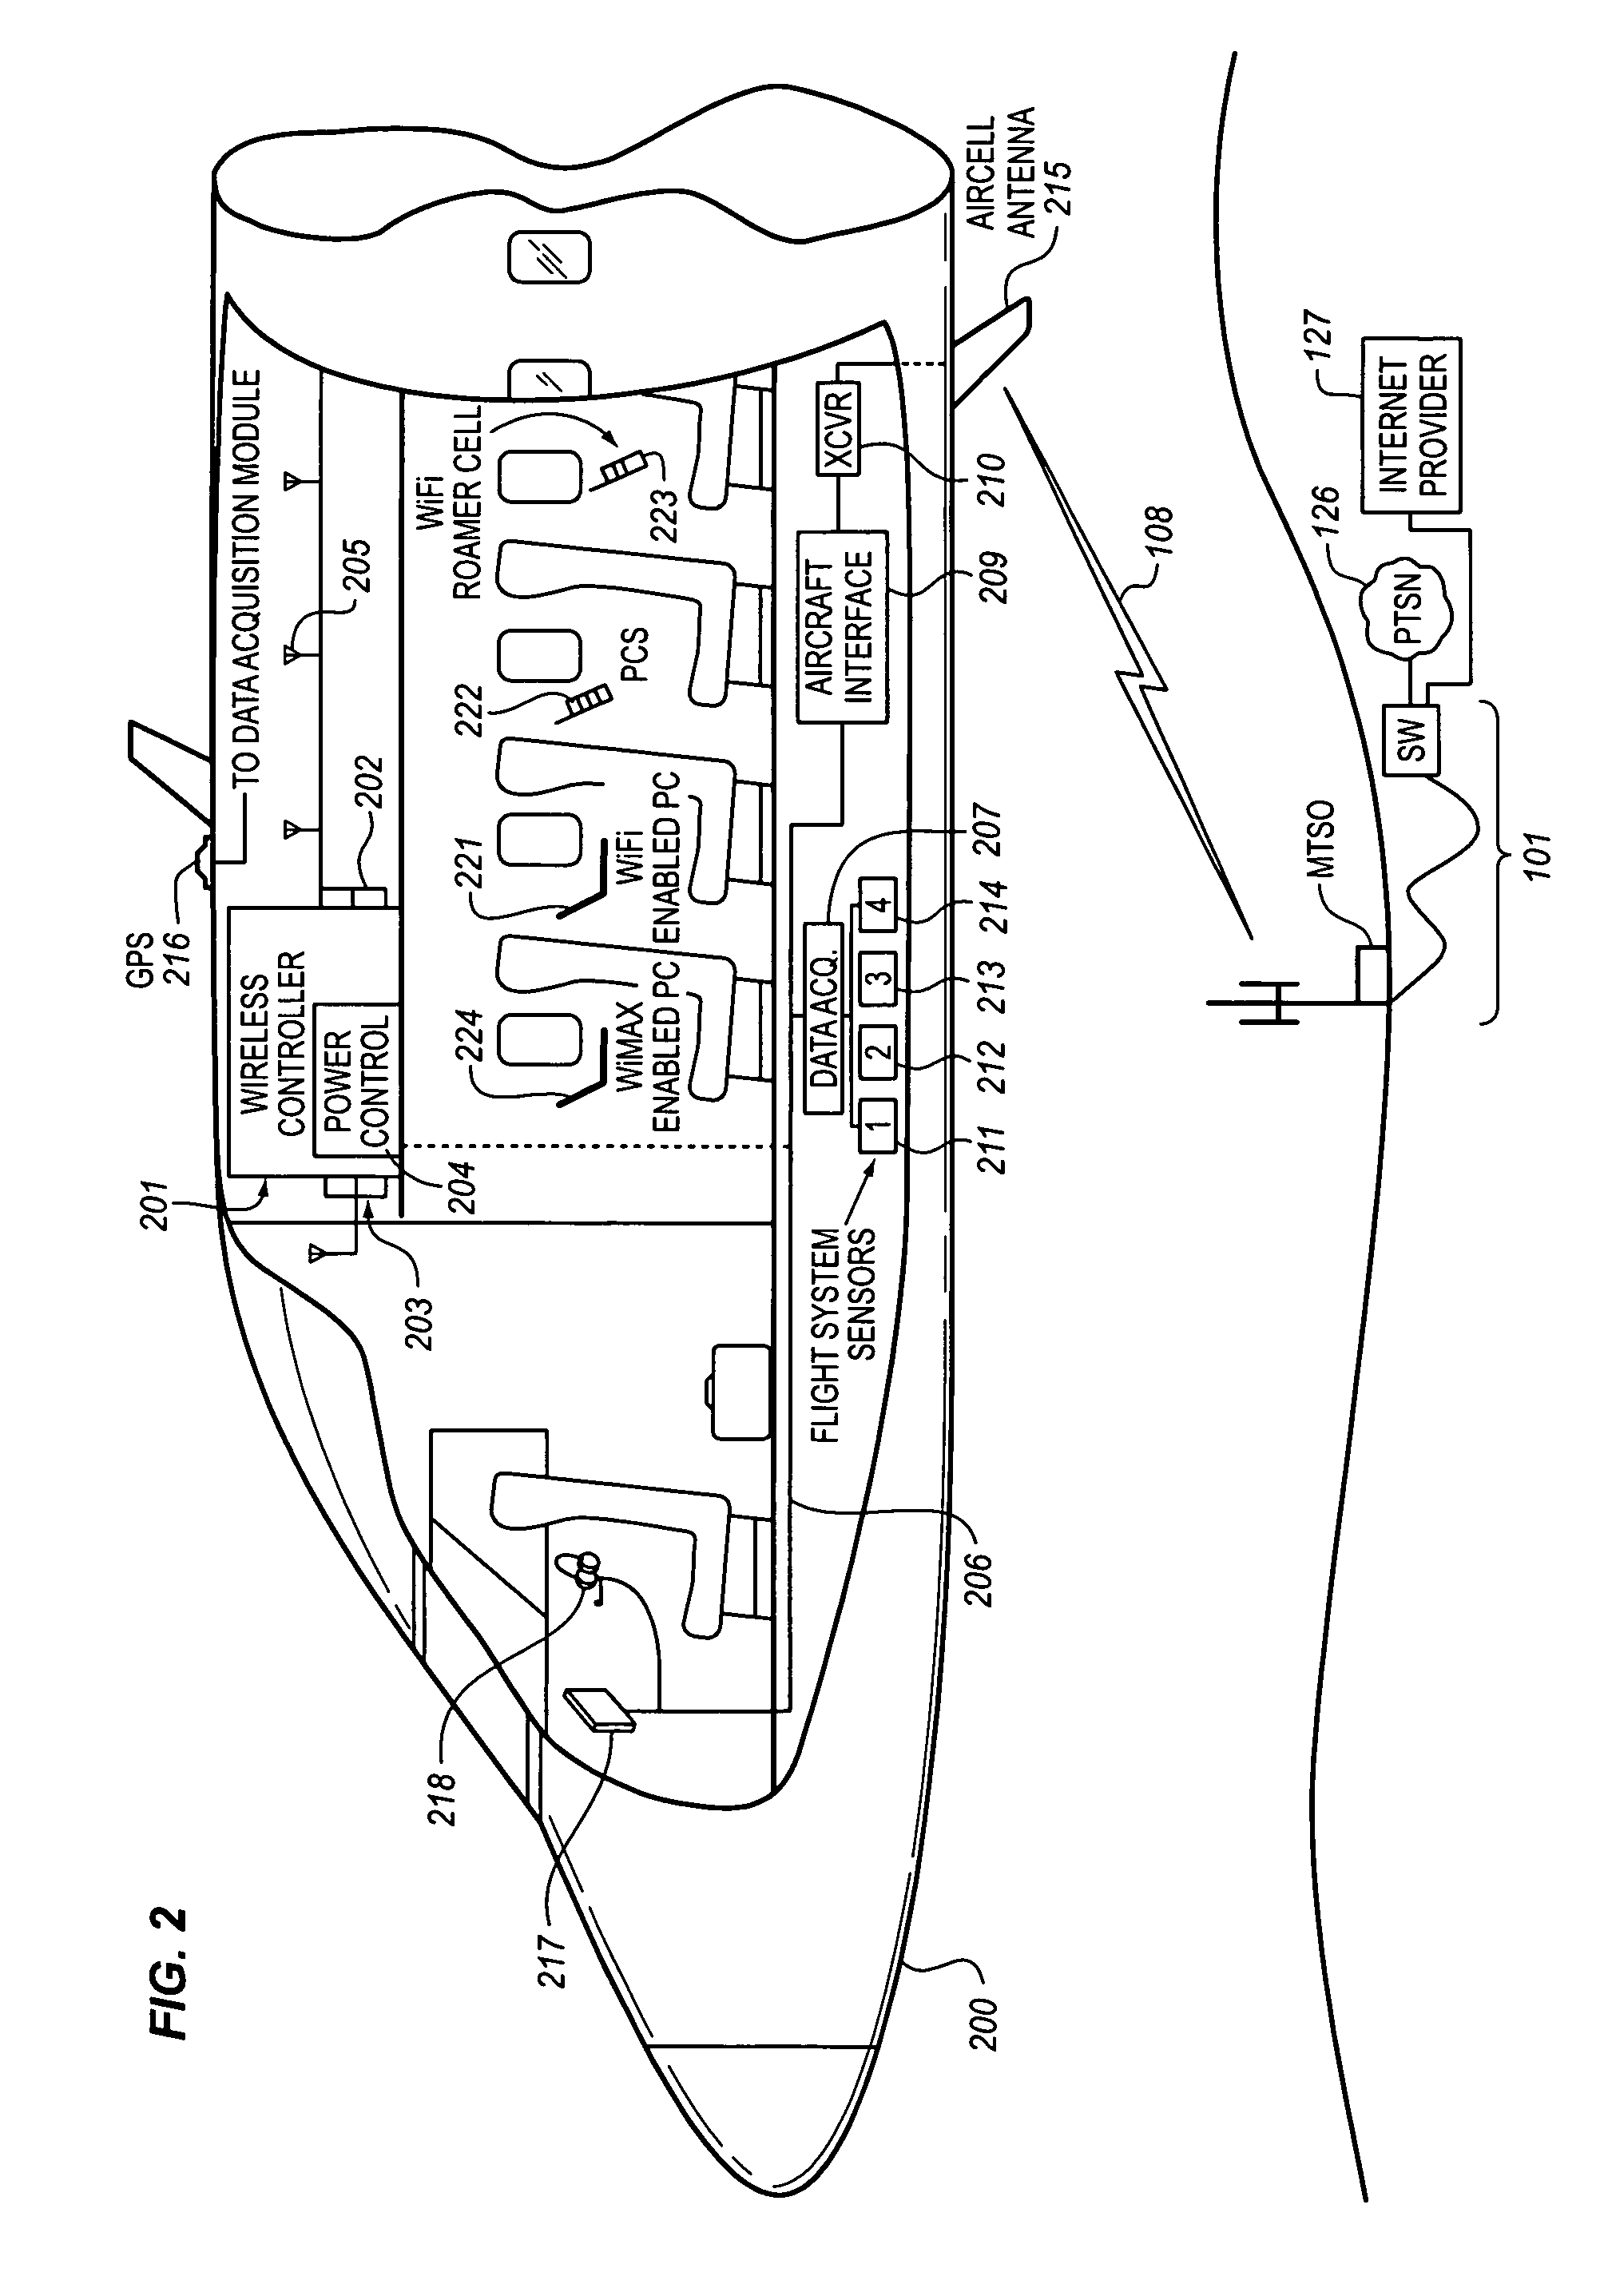 System for handoff of aircraft-based content delivery to enable passengers to receive the remainder of a selected content from a terrestrial location